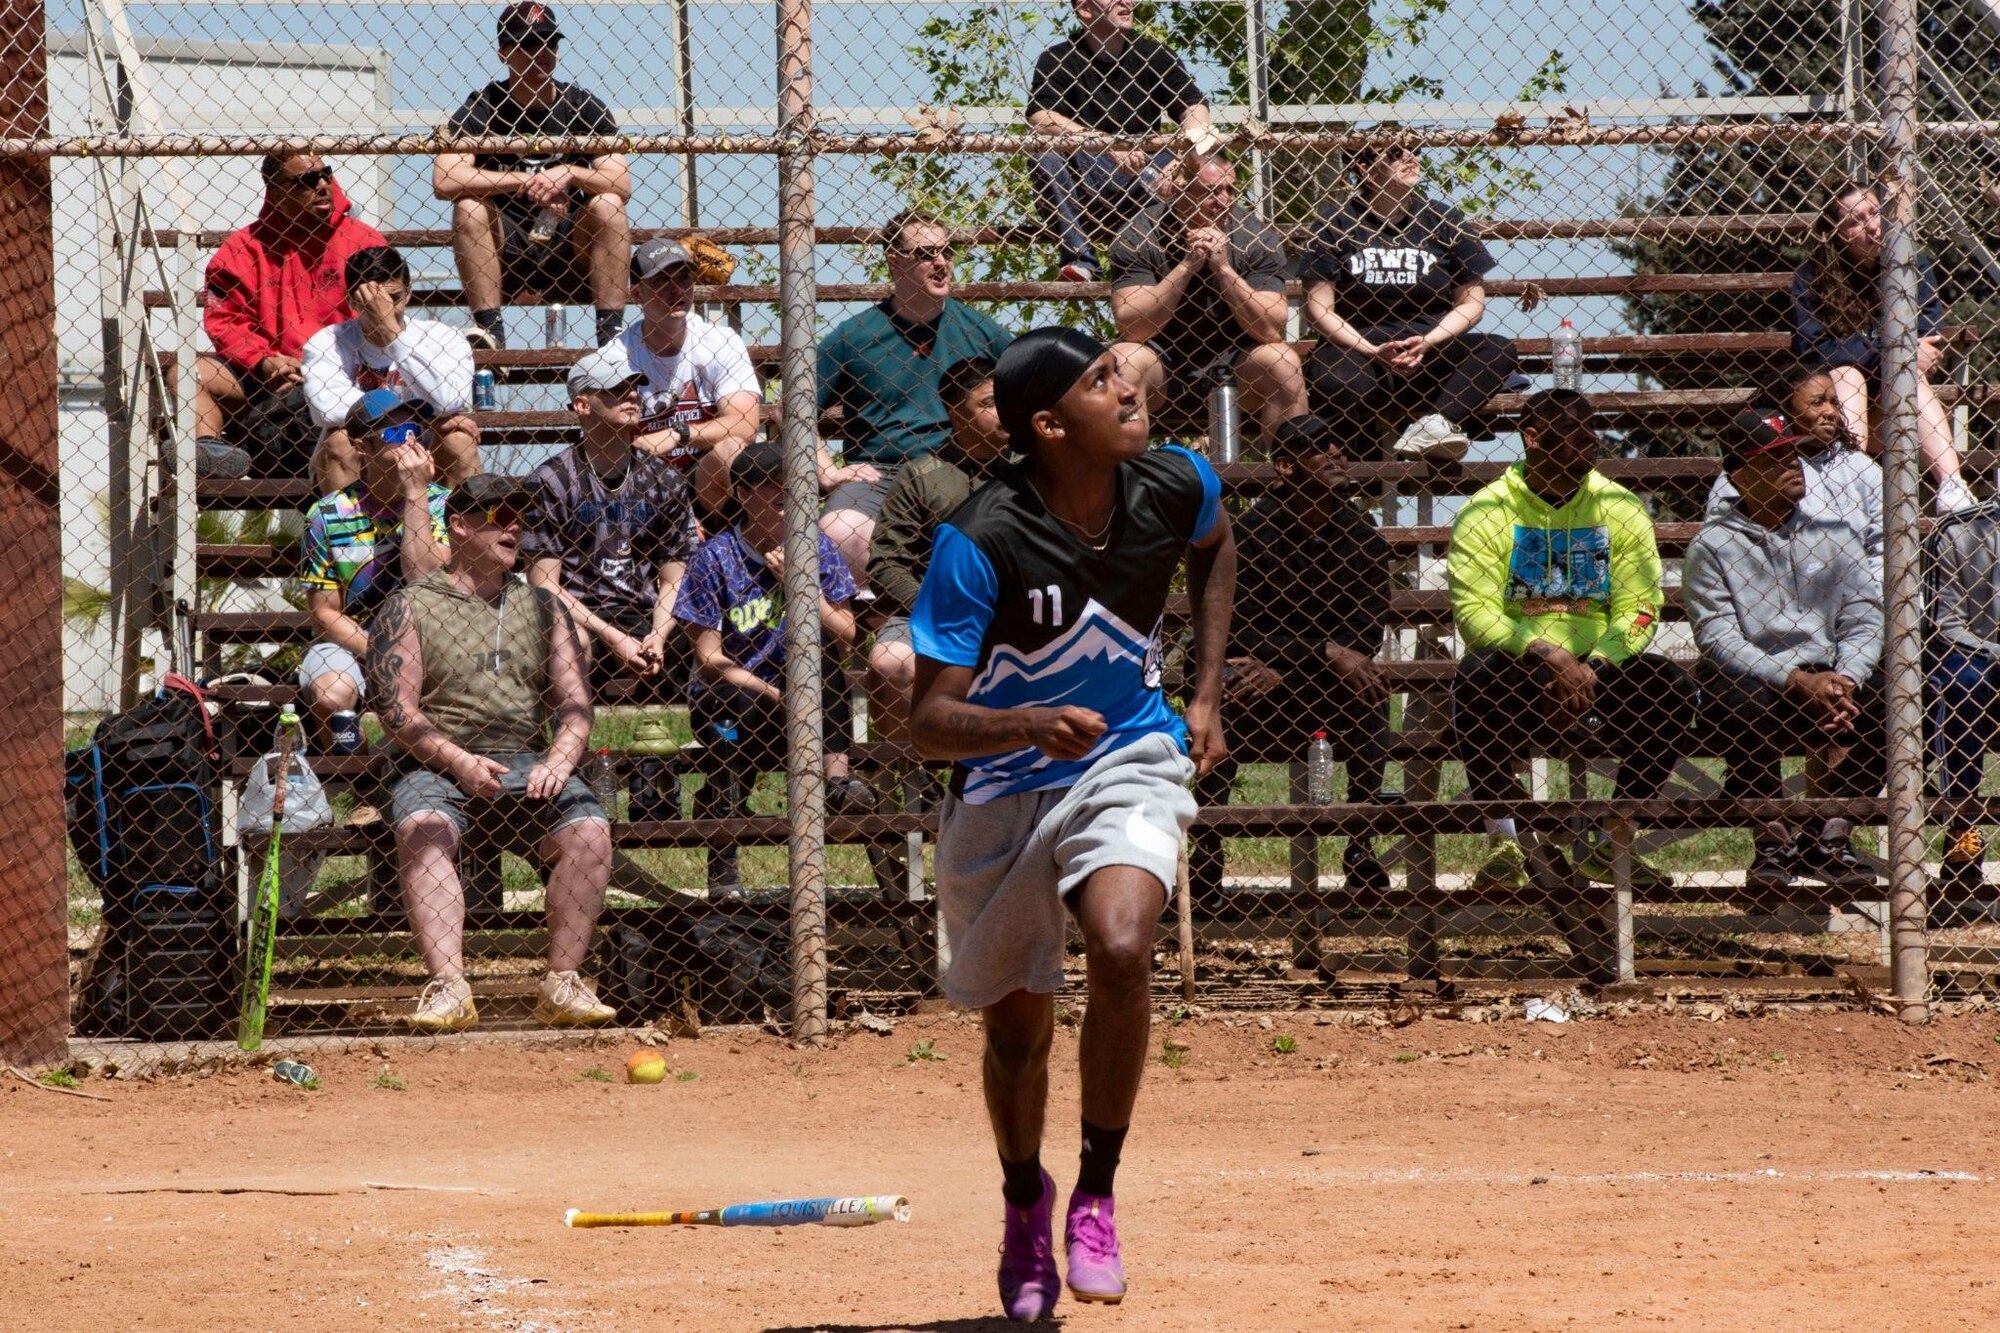 Airman 1st Class Kenesa Debela, an outbound cargo technician assigned to the 39th Logistics Readiness Squadron, participates in a softball tournament during the 39th Air Base Wing sports day at Incirlik Air Base, Turkey, April 14, 2022. During the event, U.S. military members, civilians, Turkish local national employees and NATO allies competed in a series of scored athletic events and activities to kick off the spring season. The day concluded with a closing ceremony where the highest ranking teams were awarded trophies or medals. (U.S. Air Force photo by Staff Sgt. Gabrielle Winn)